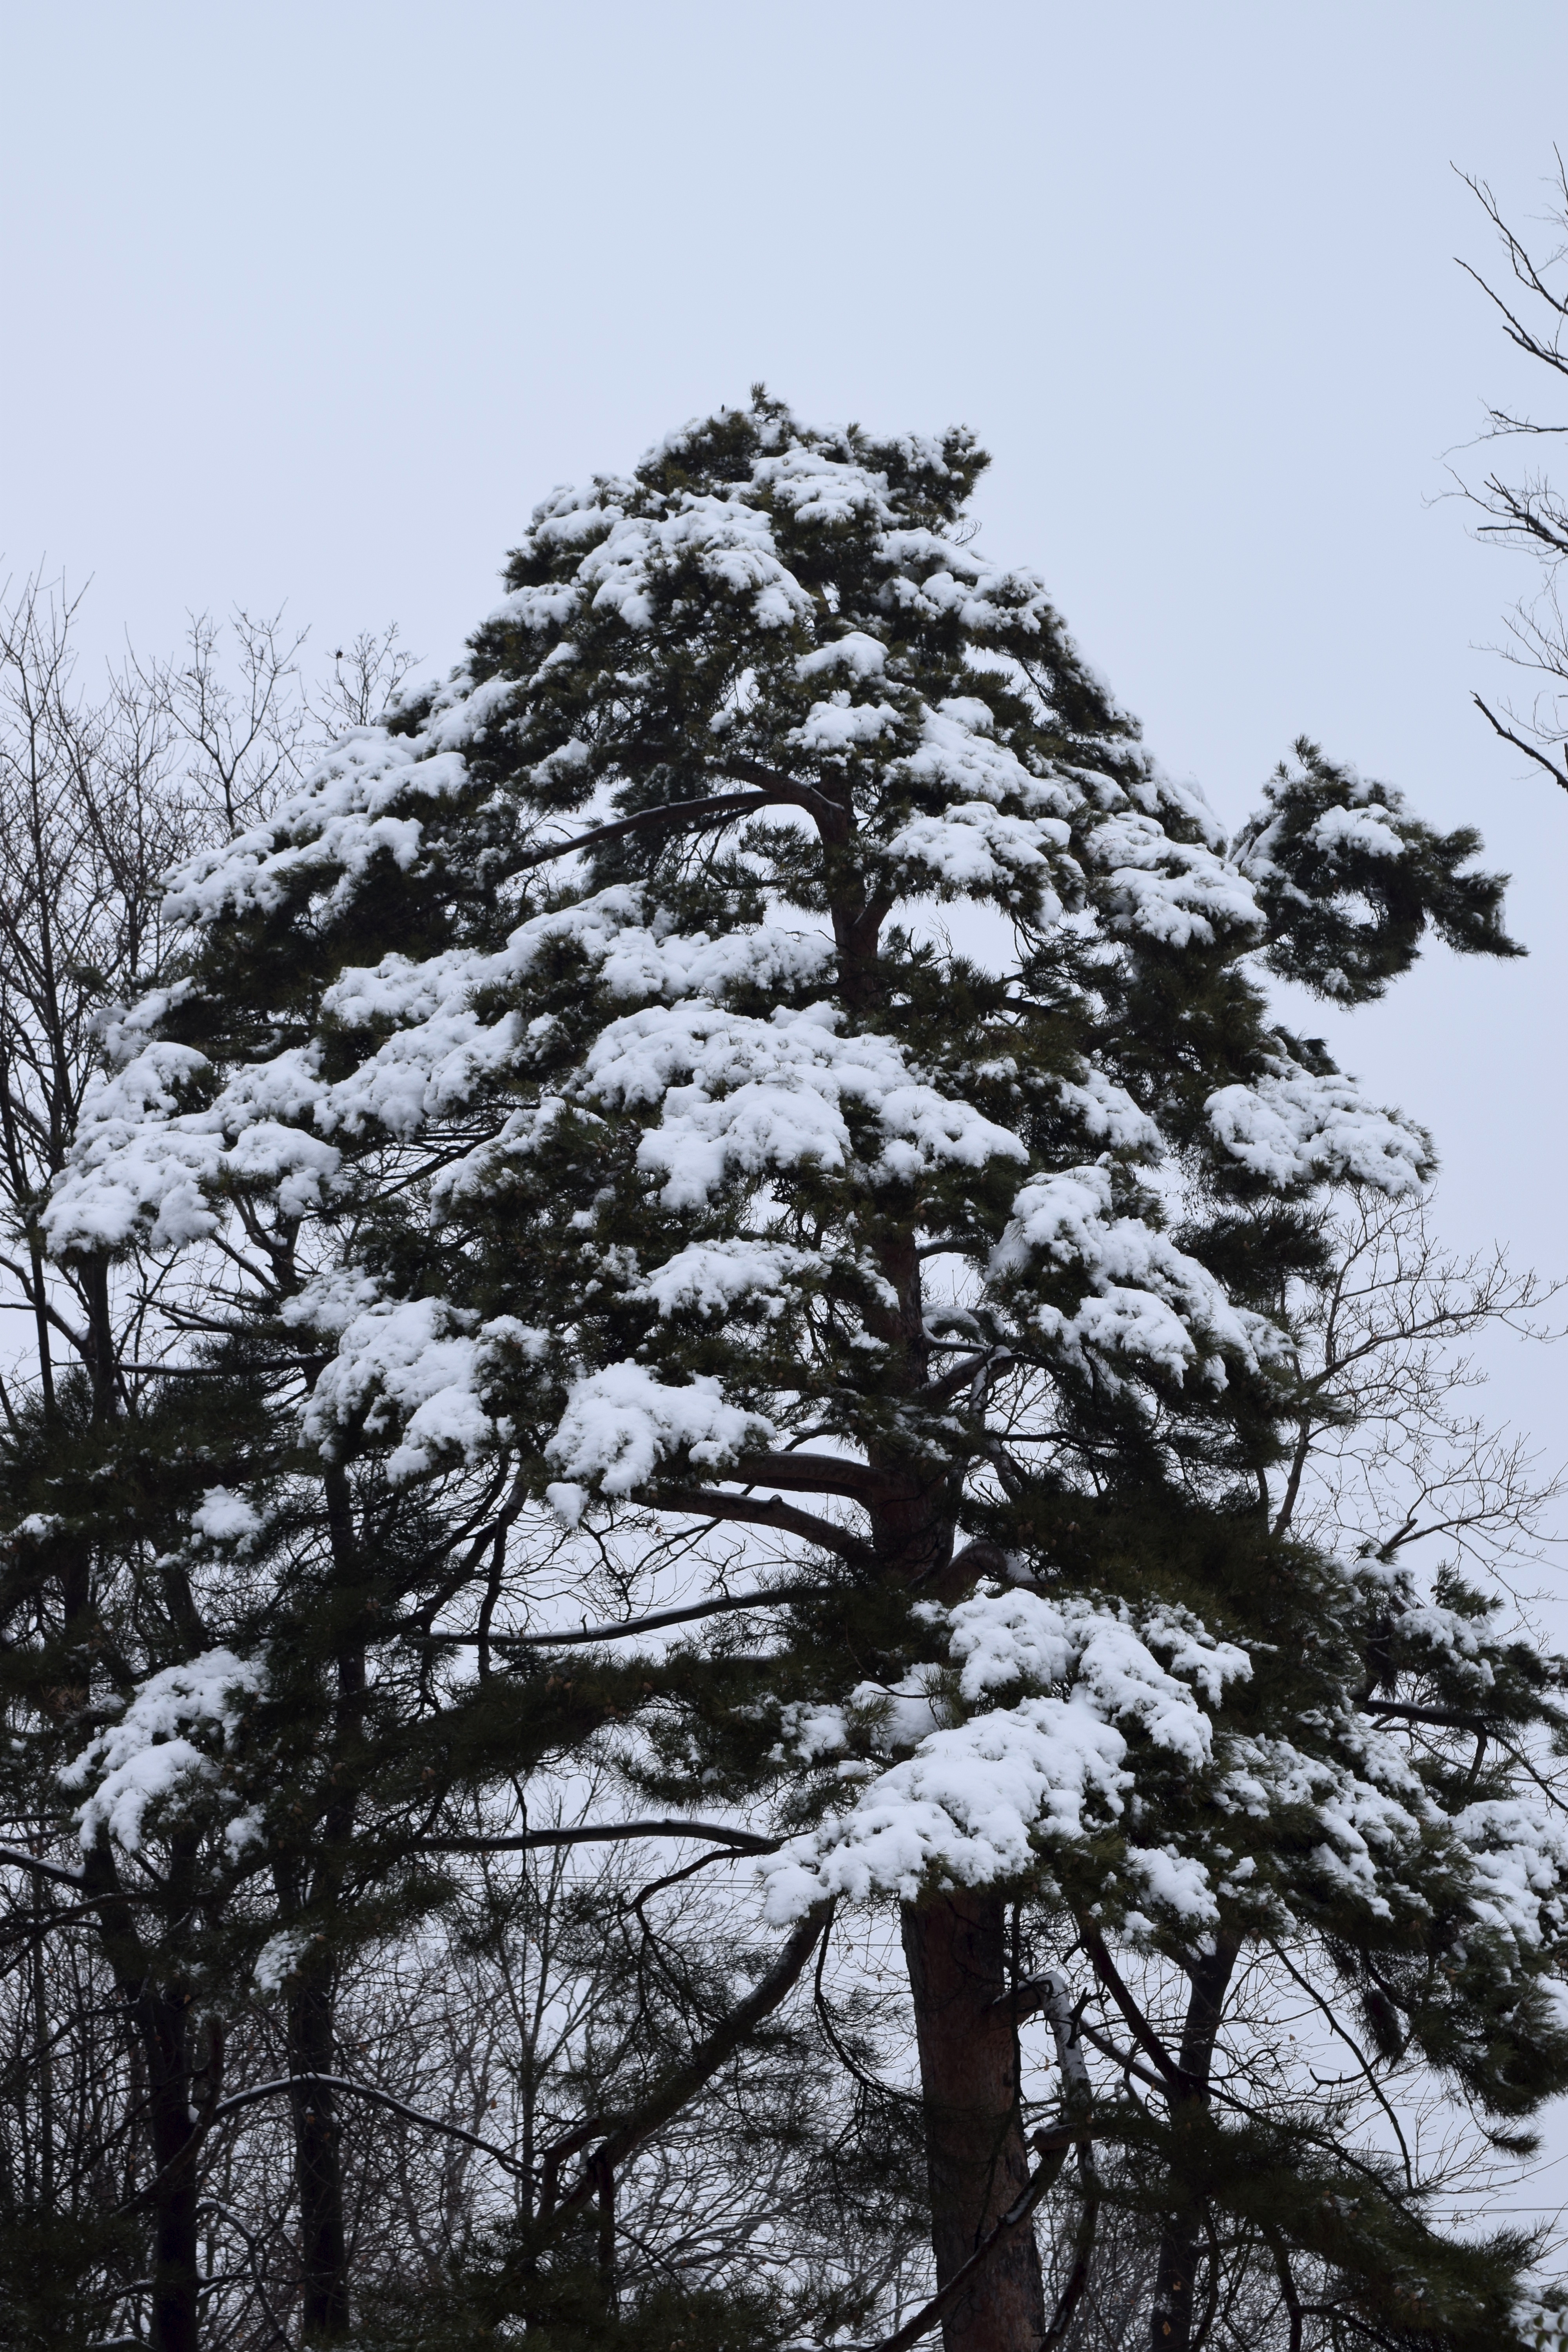 Scots Pine outlined in snow (Pinus sylvestris)